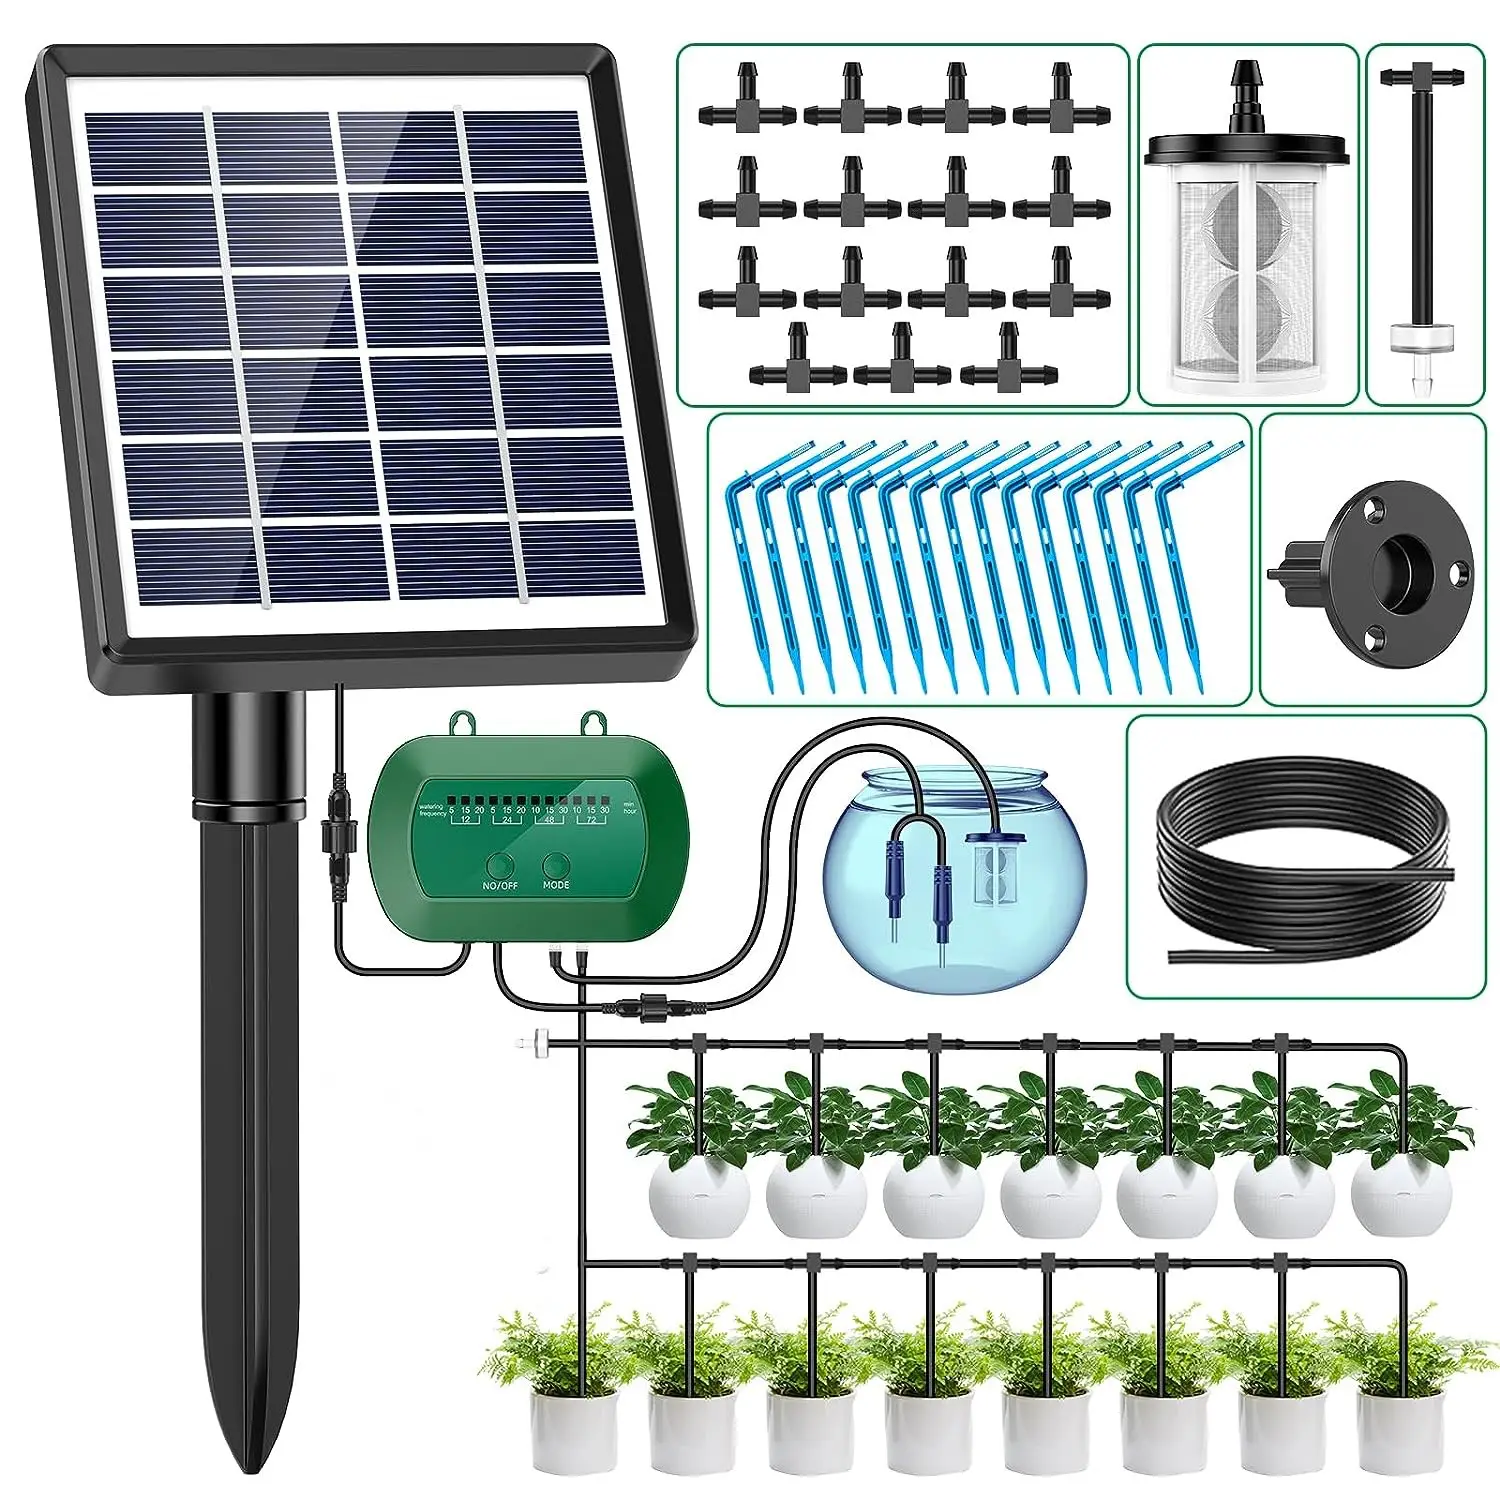 Automatic Balcony Solar Drip Irrigation Kit Indoor Garden Hydroponics Plants Self Water Dripping System Watering   Irrigation